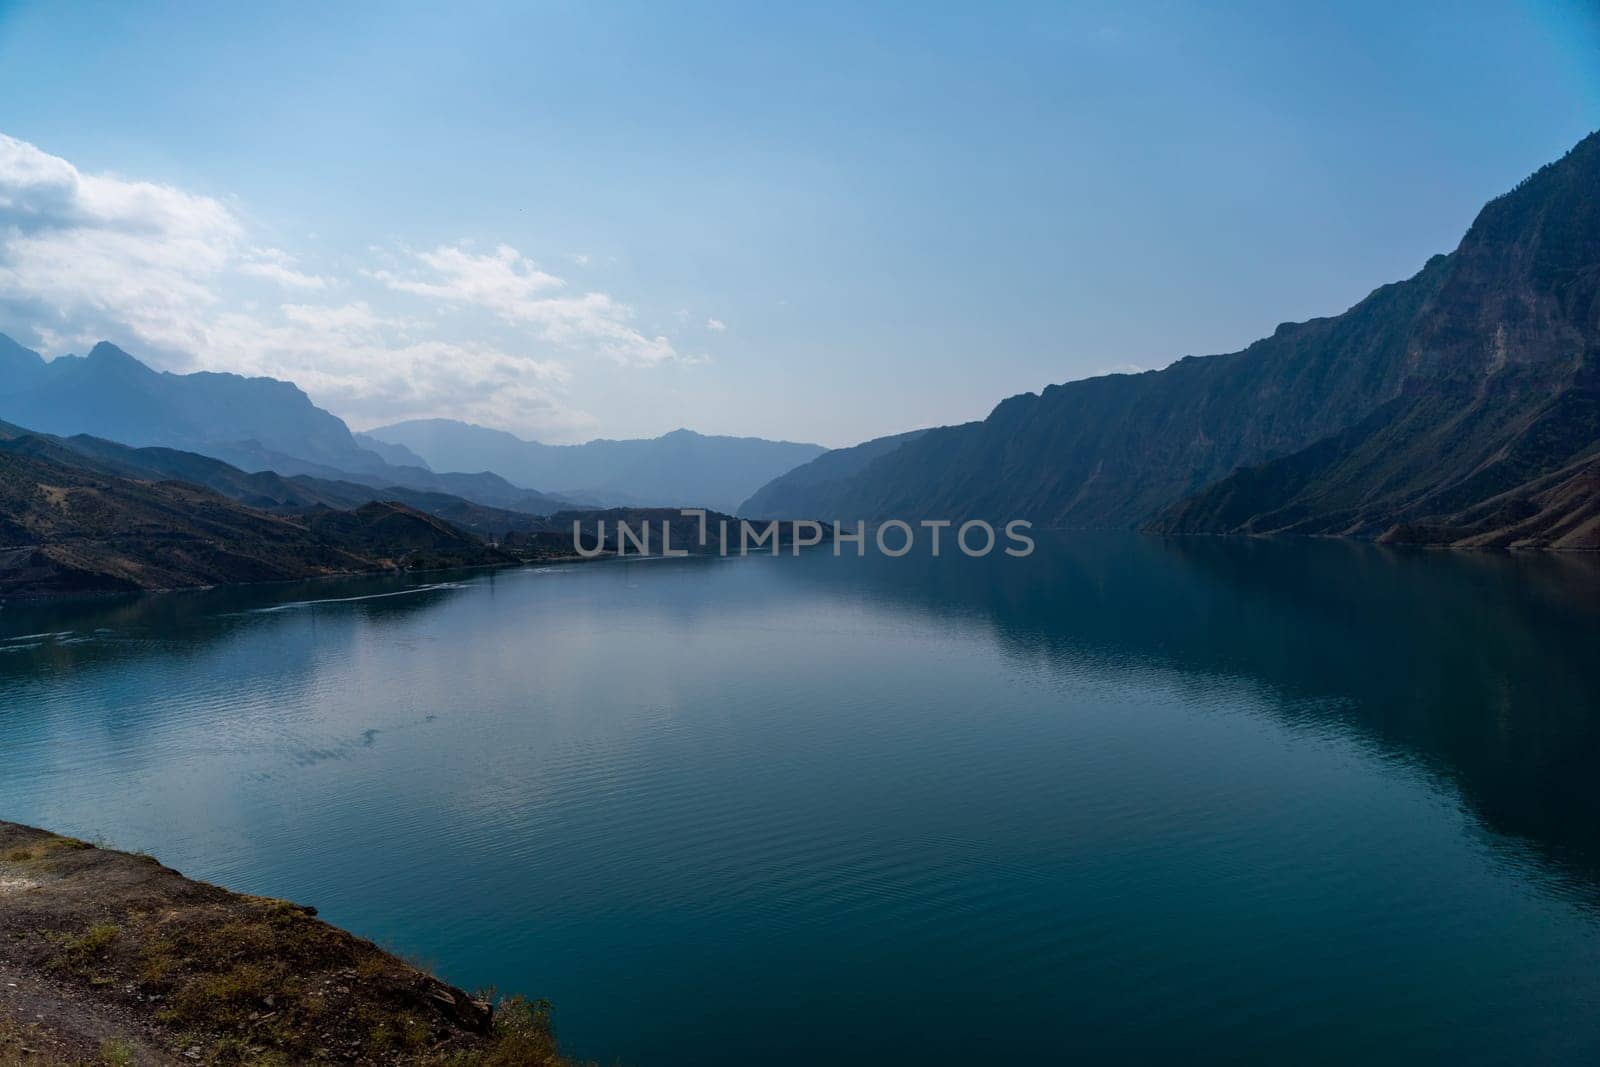 Irganai reservoir in Dagestan. Picturesque lake in the Caucasus mountains